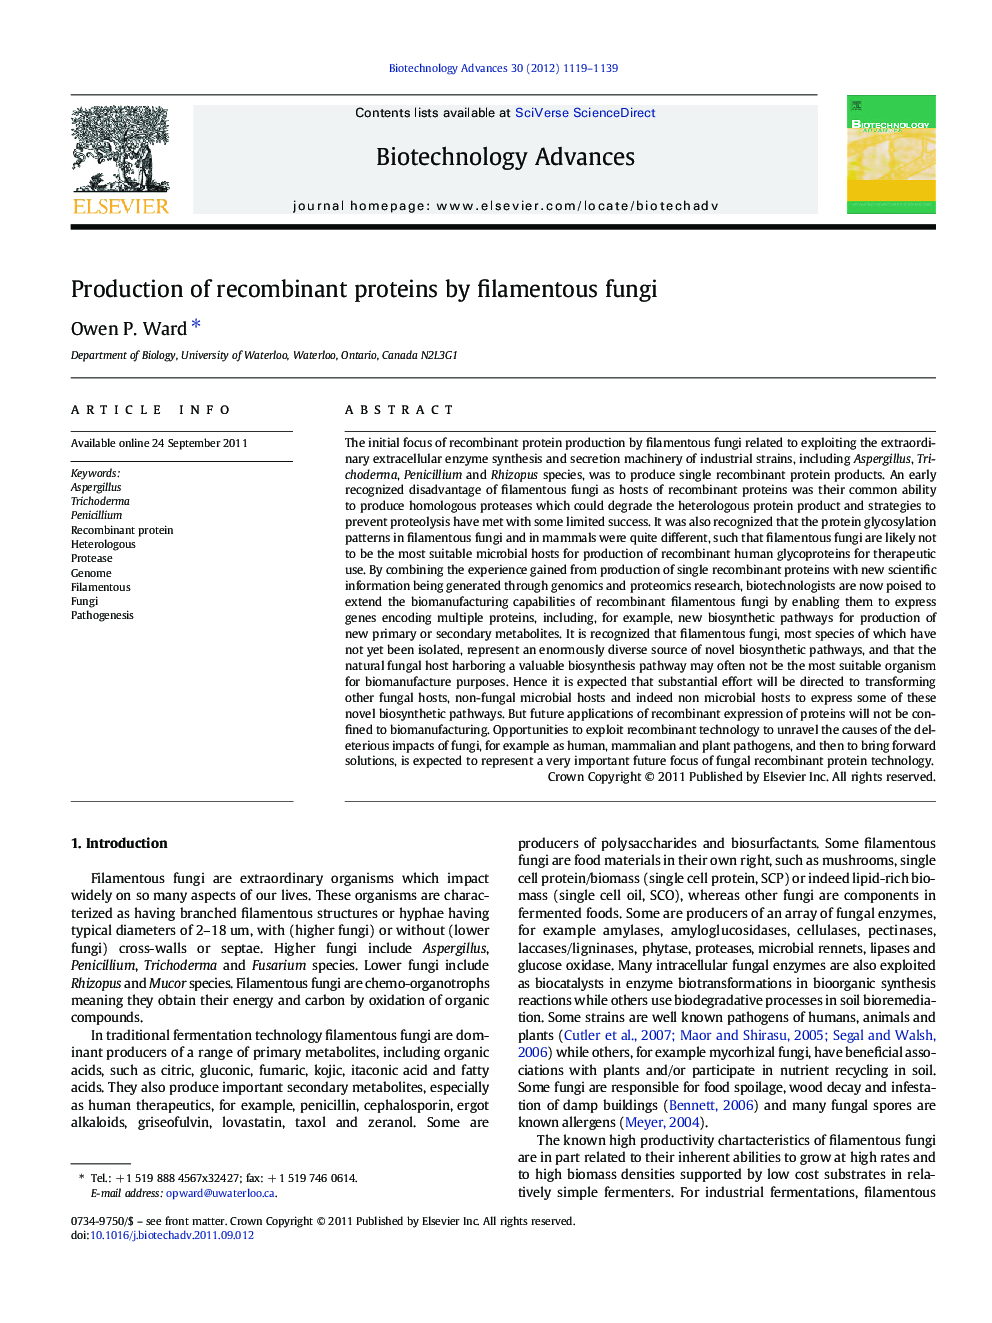 Production of recombinant proteins by filamentous fungi